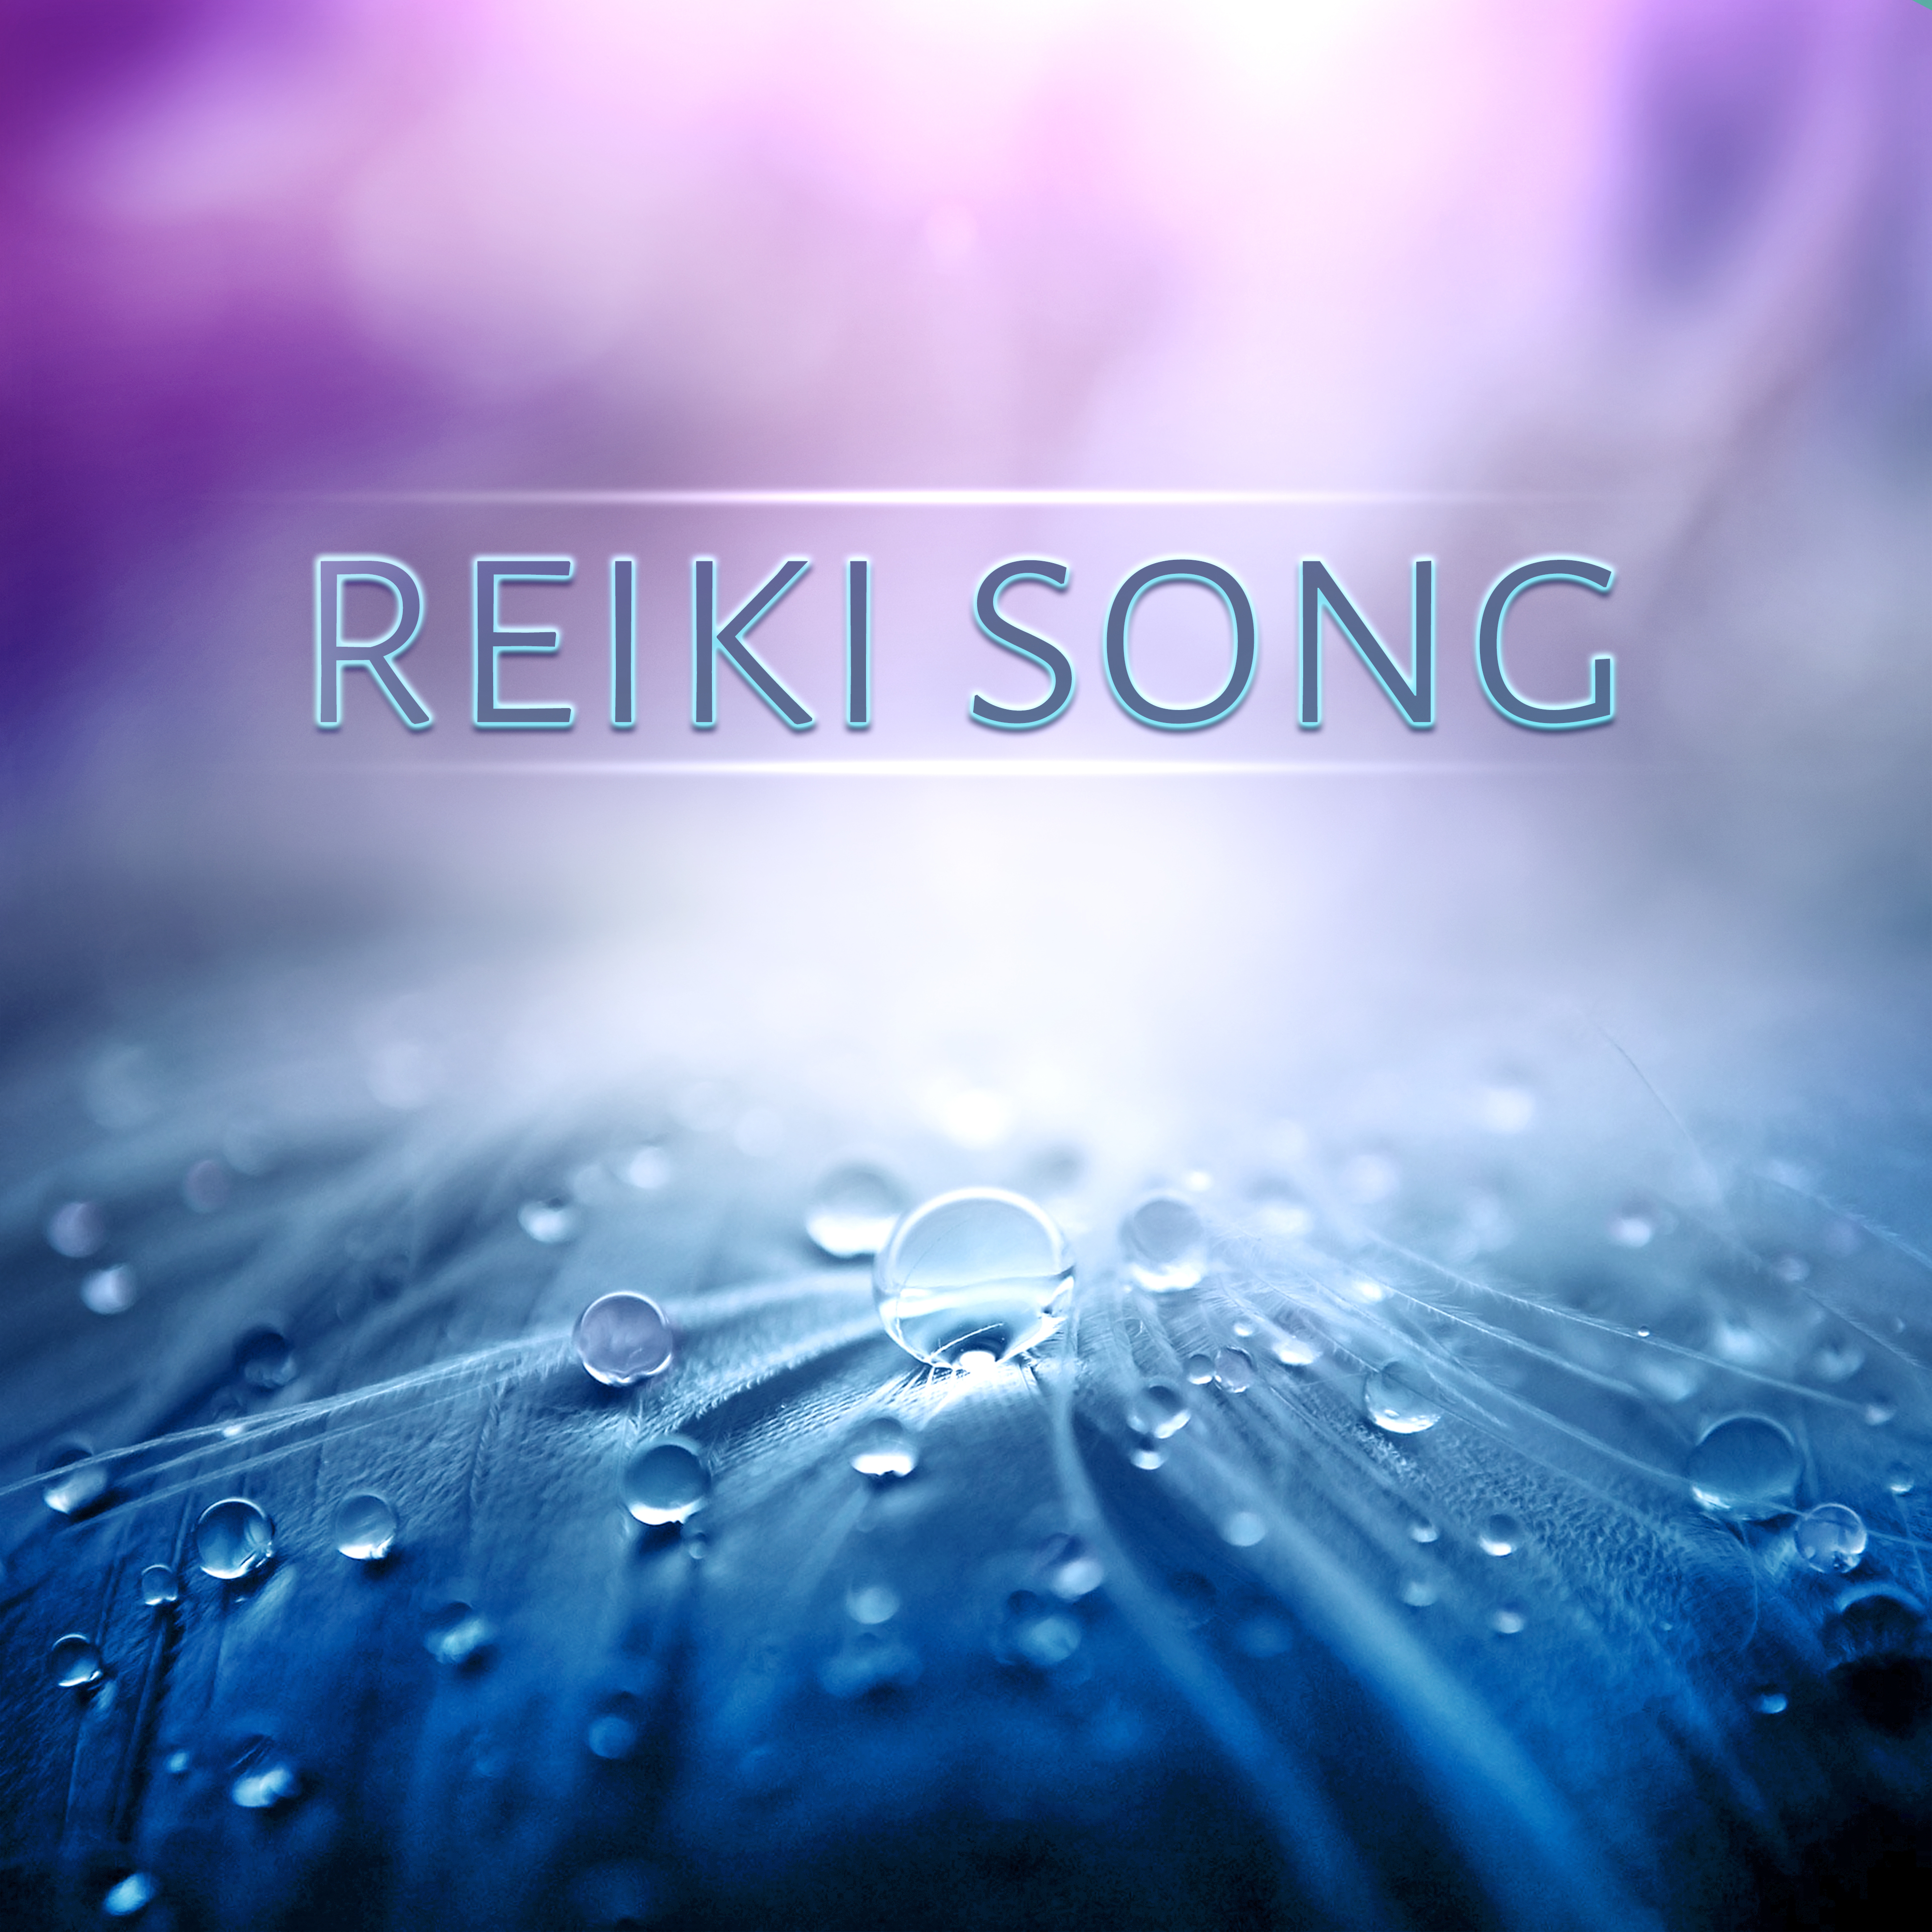 Reiki Song (Spa Music) – Nature Pure Sounds, Healing and Inner Peace, Ultimate Wellness Center Sounds, Total Relaxation, Reiki, Massage